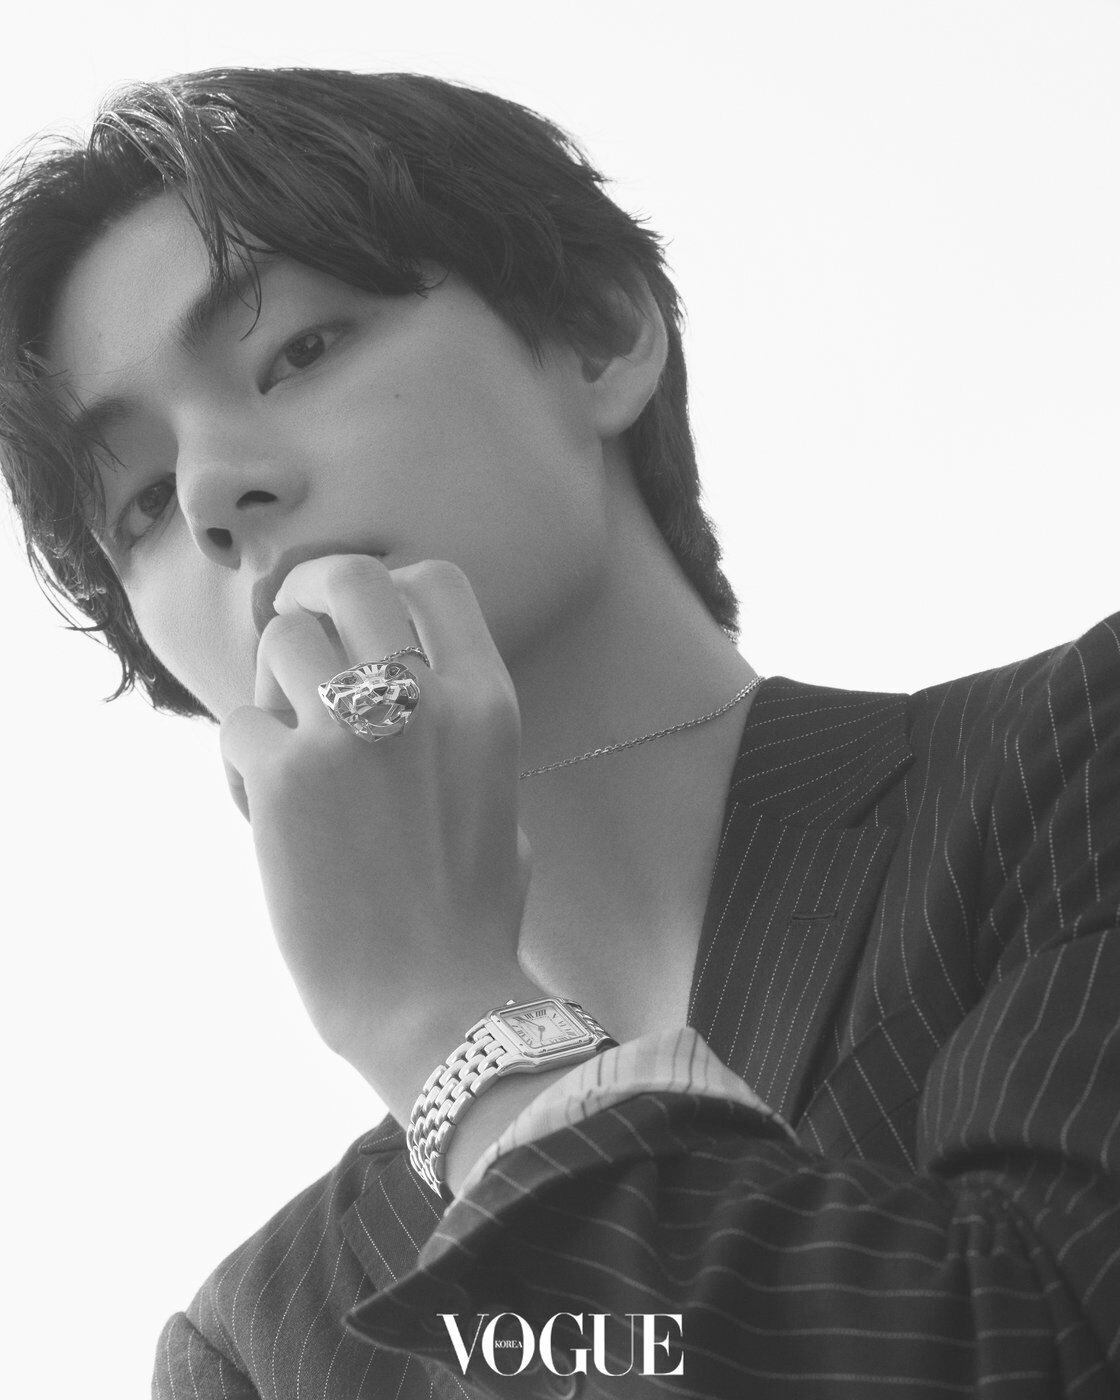 In pictures: The full Cartier campaign starring BTS's V